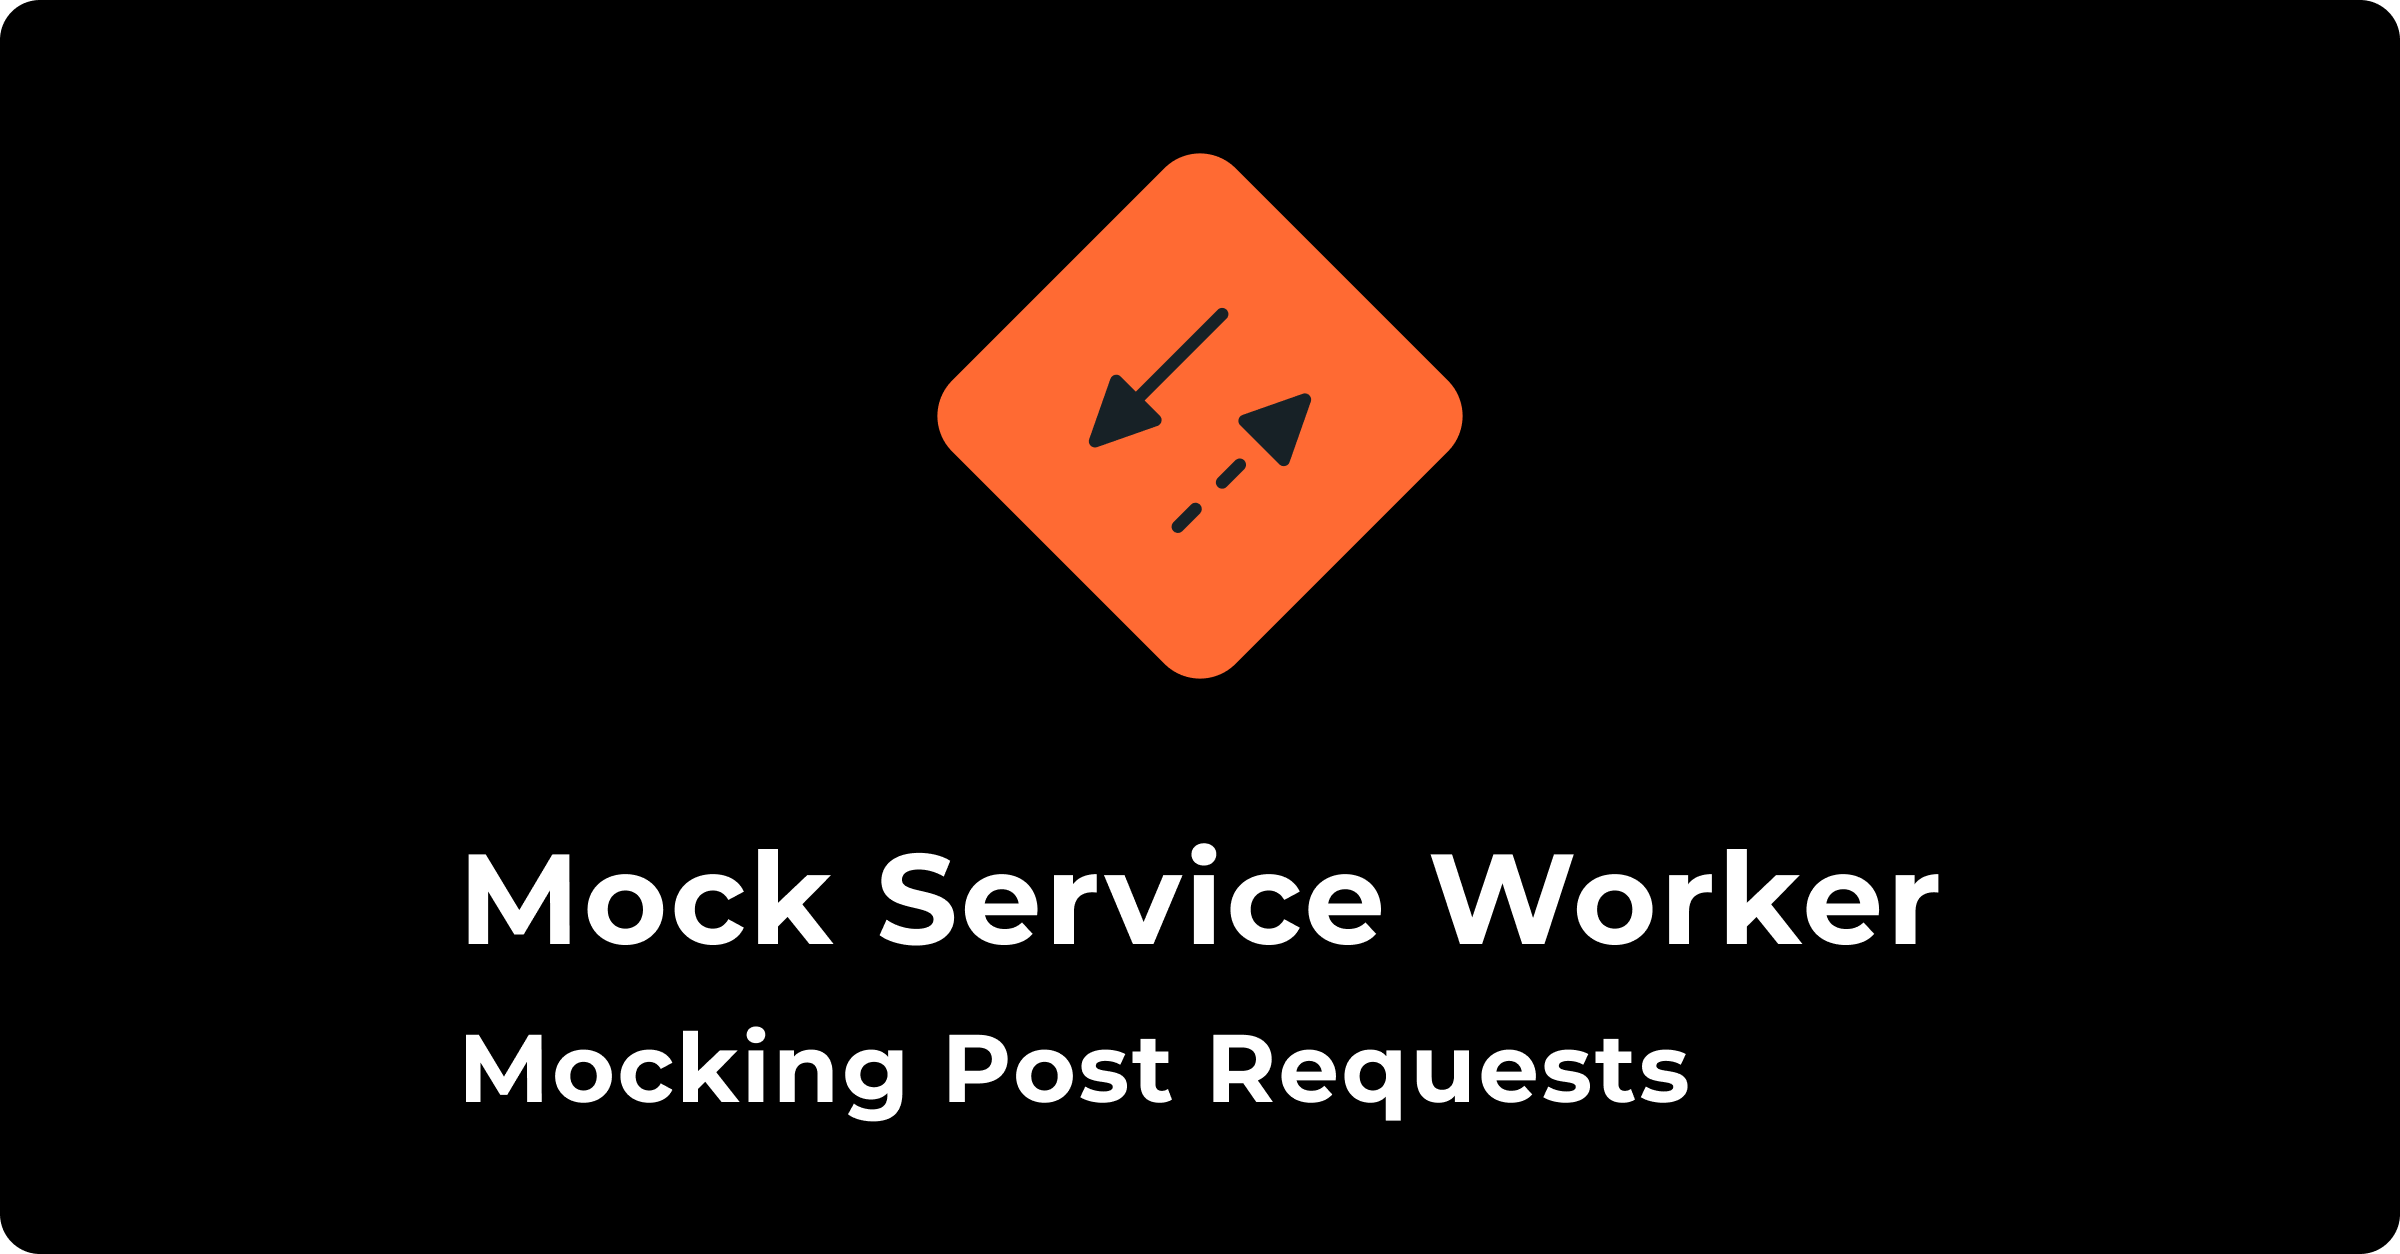 Card Image with black background and Mock Service Worker Logo with bold white text that says "Mock Service Worker Mocking Post Requests"